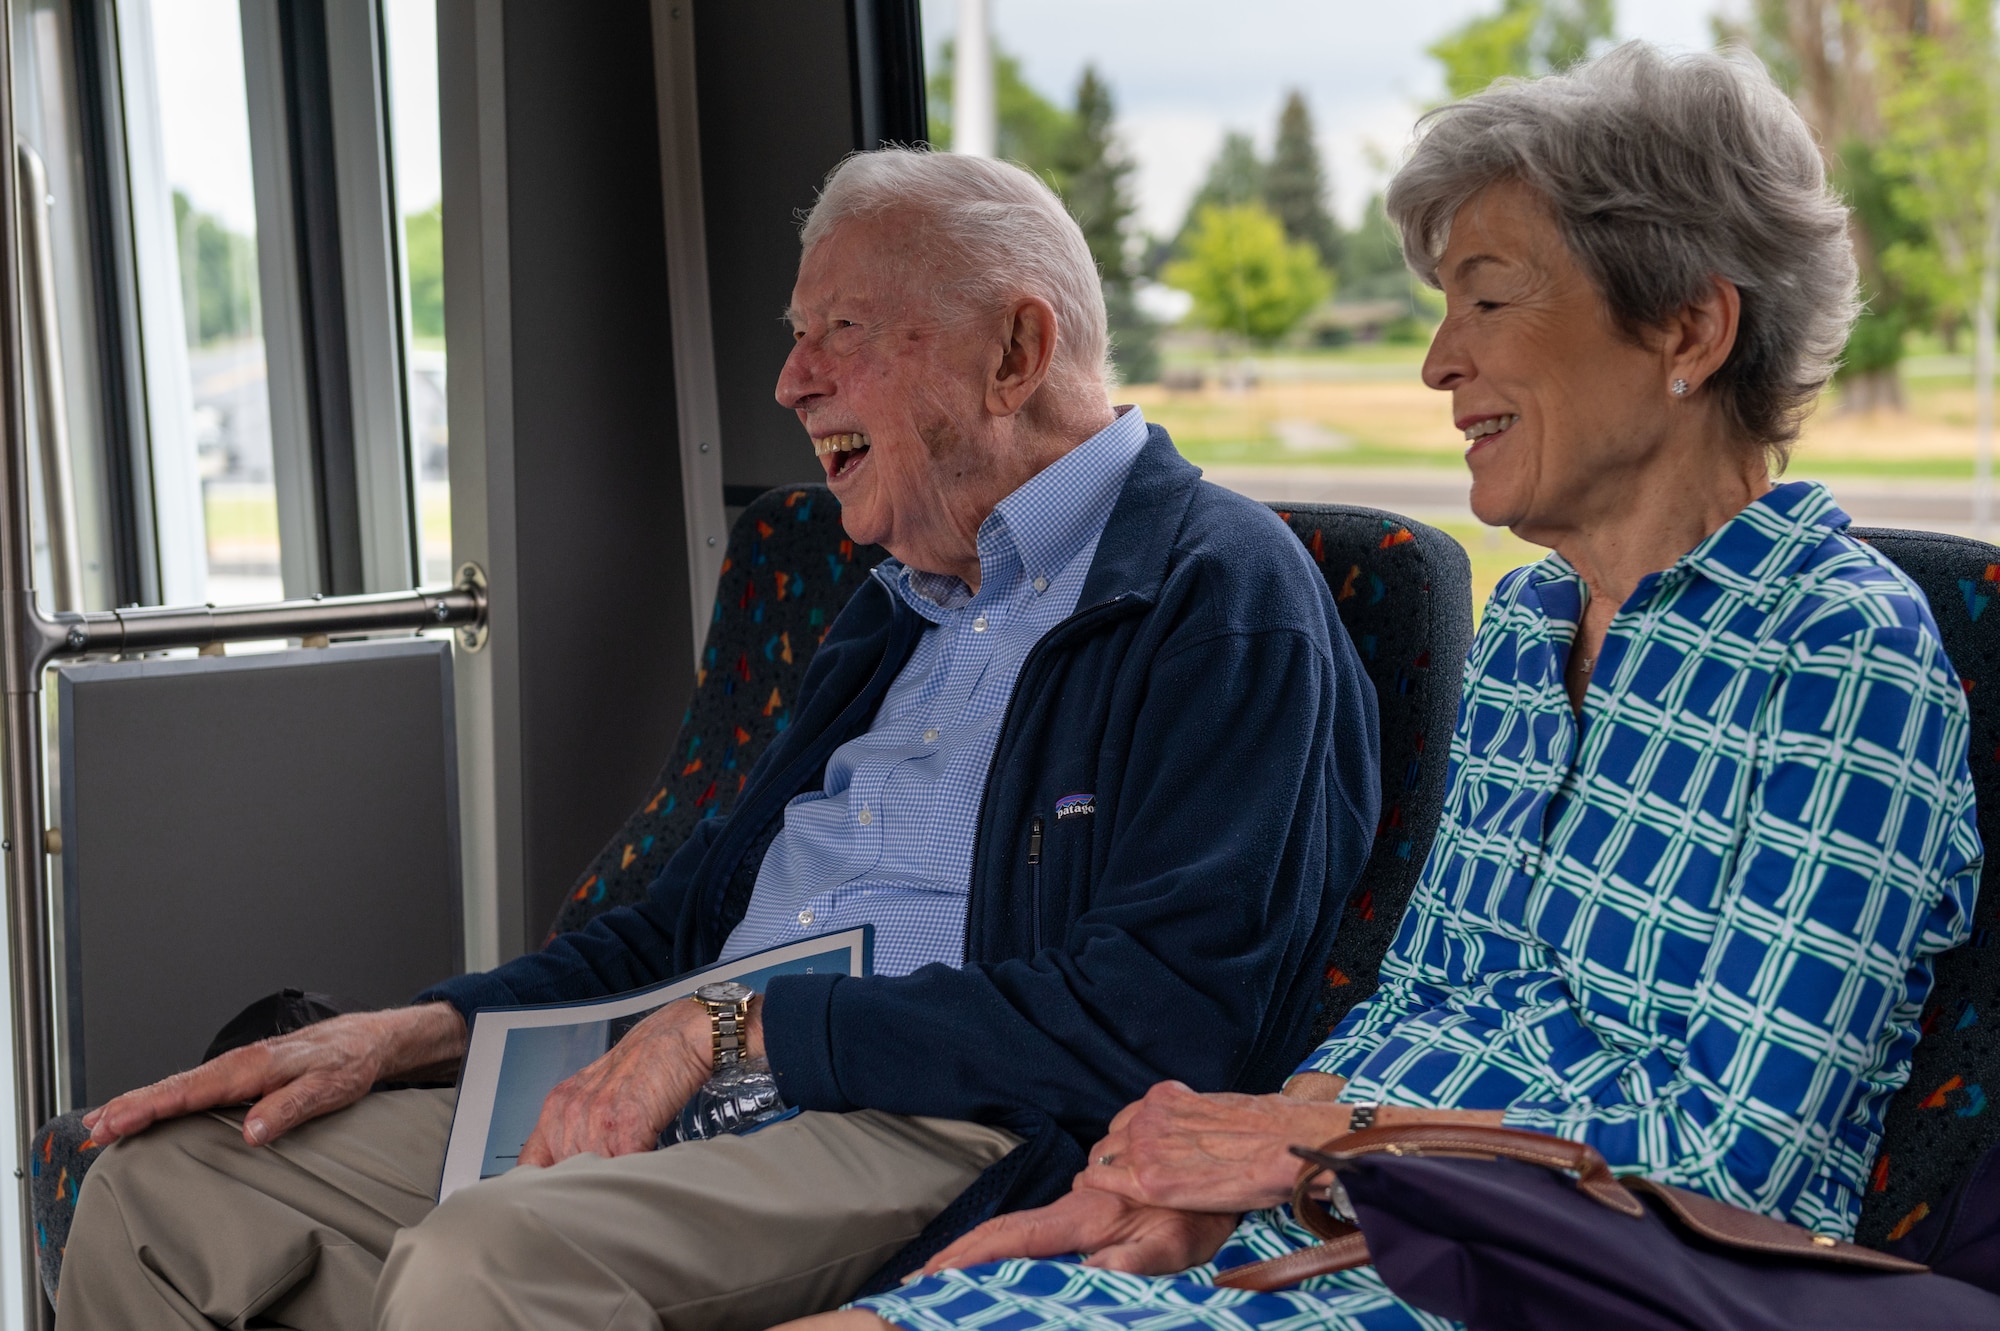 Retired Gen. John Shaud, former 92nd Bombardment wing commander, and his spouse receive a base tour at Fairchild Air Force Base, Washington, August 22, 2022. Shaud had not returned to Fairchild Air Force Base since his departure in 1980. (U.S. Air Force photo by Airman 1st Class Morgan Dailey)